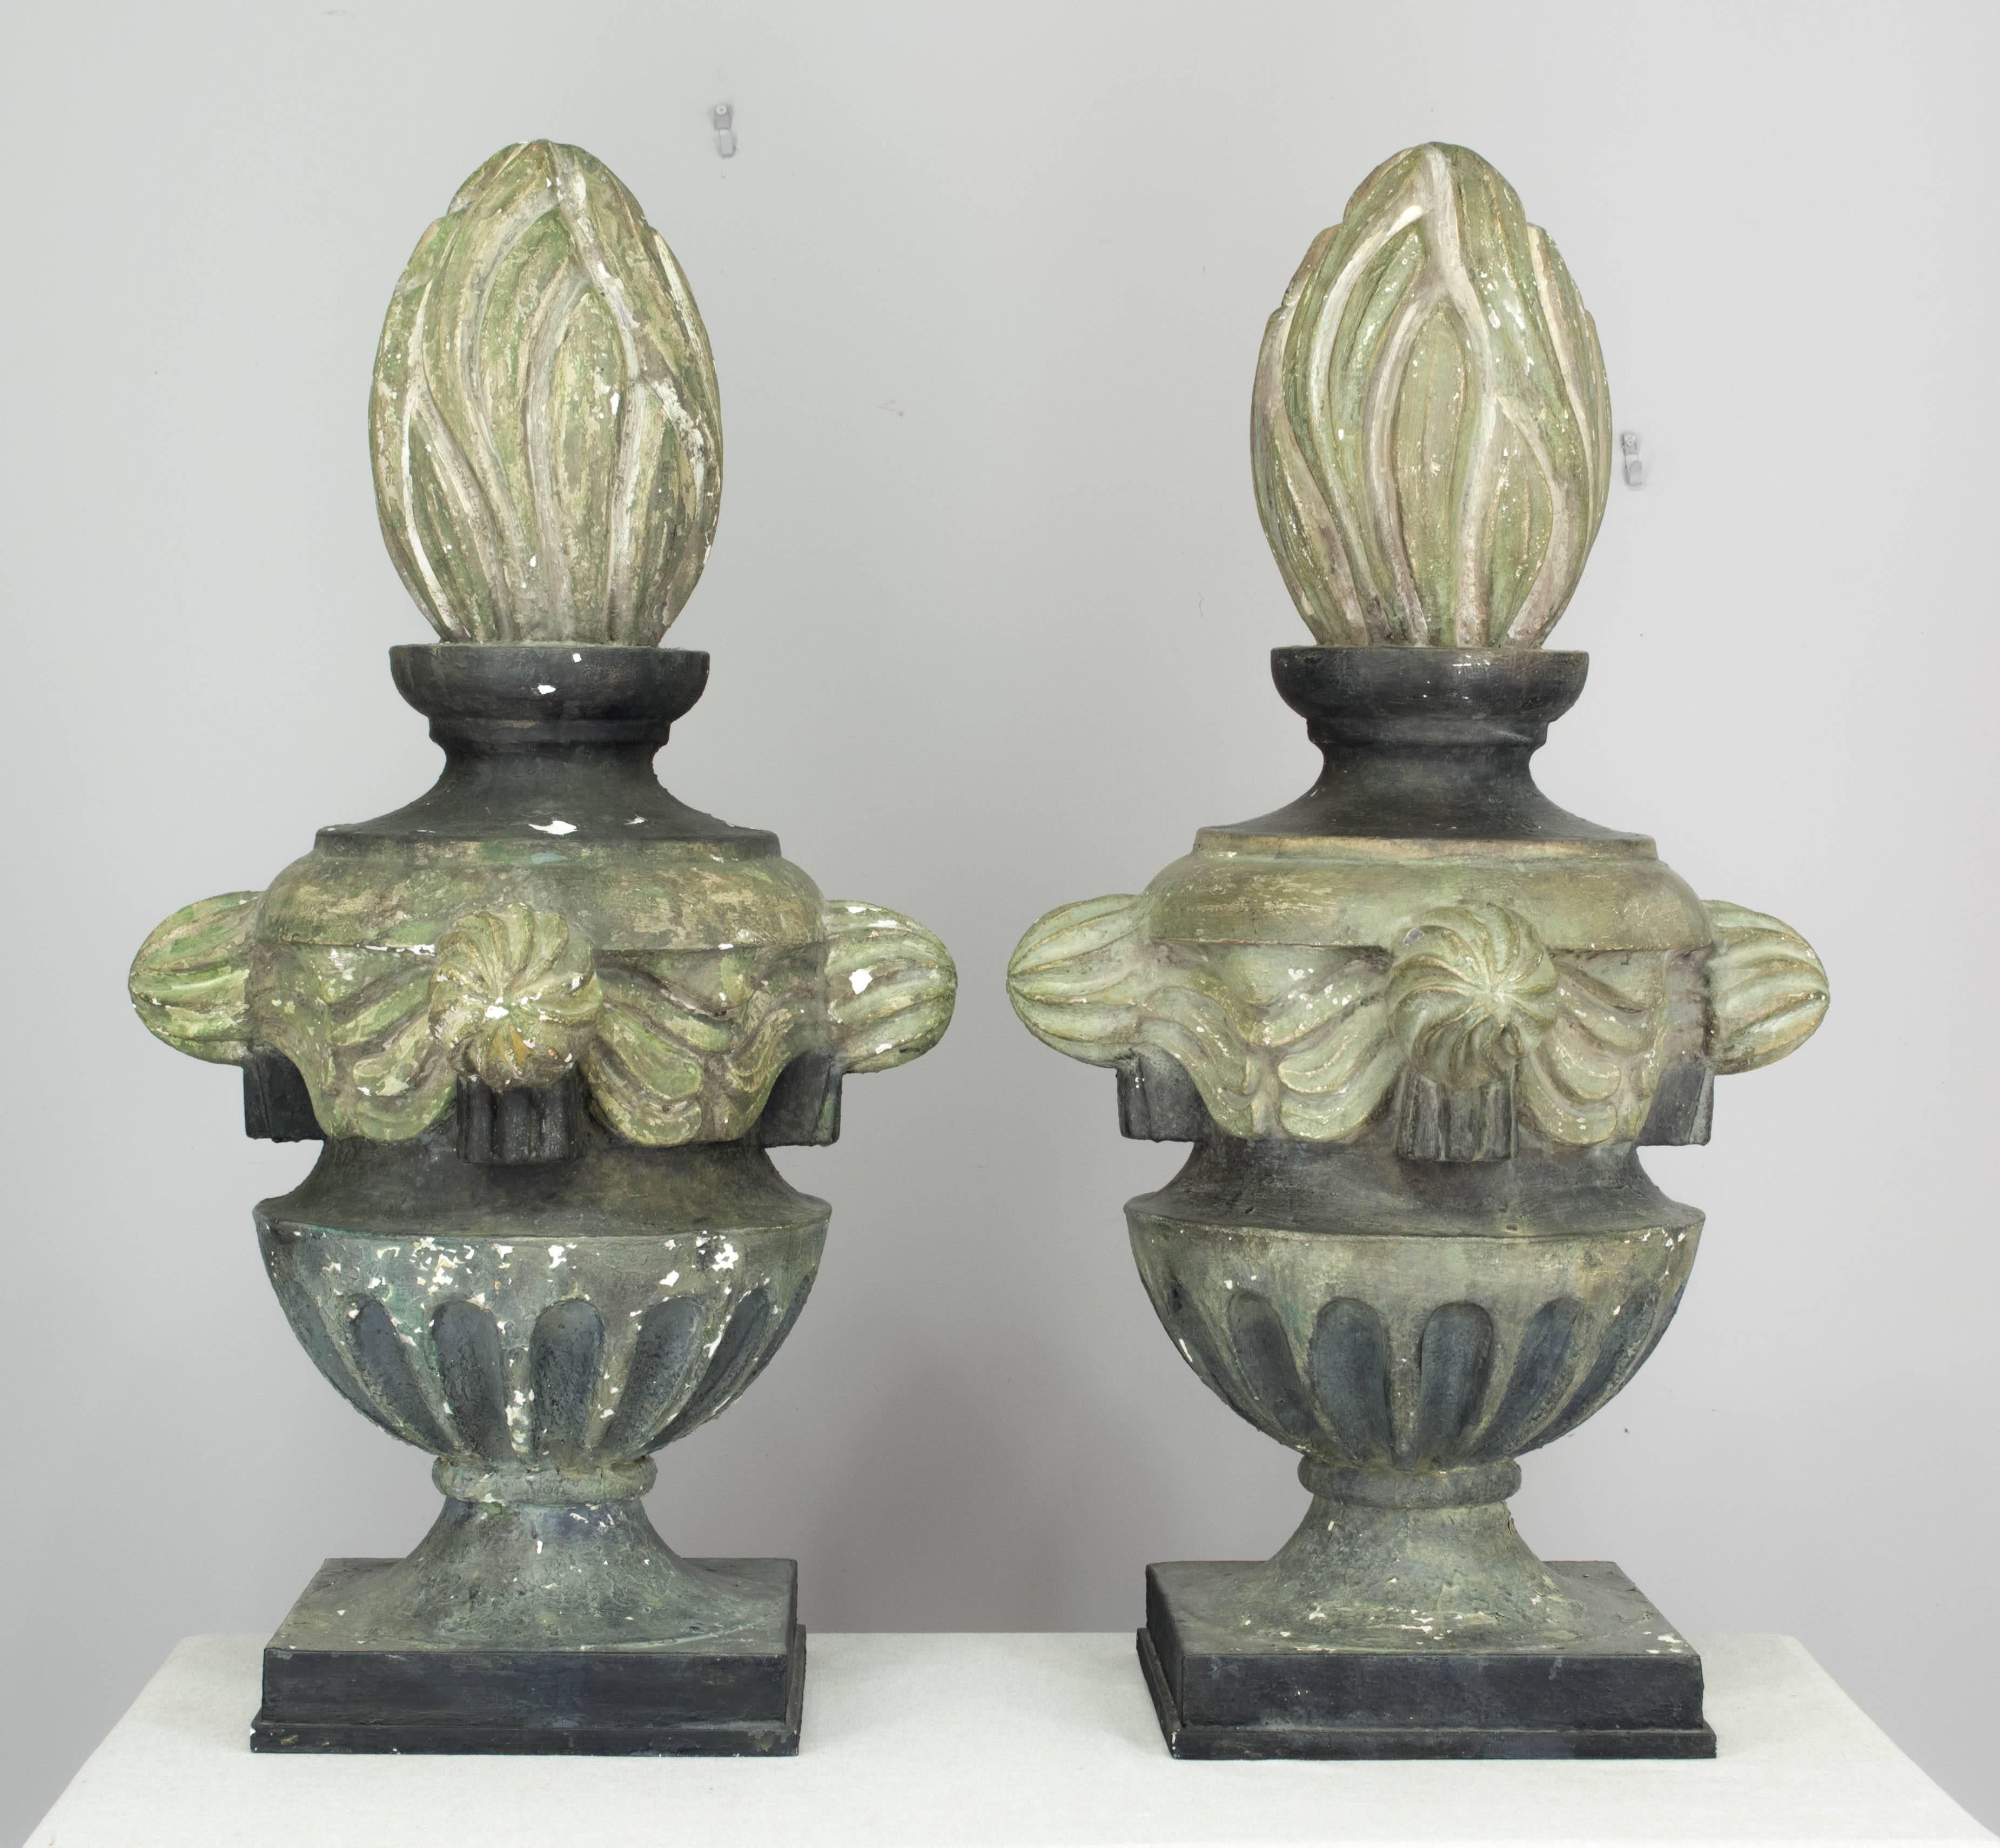 French Provincial Pair of French Zinc Architectural Finials